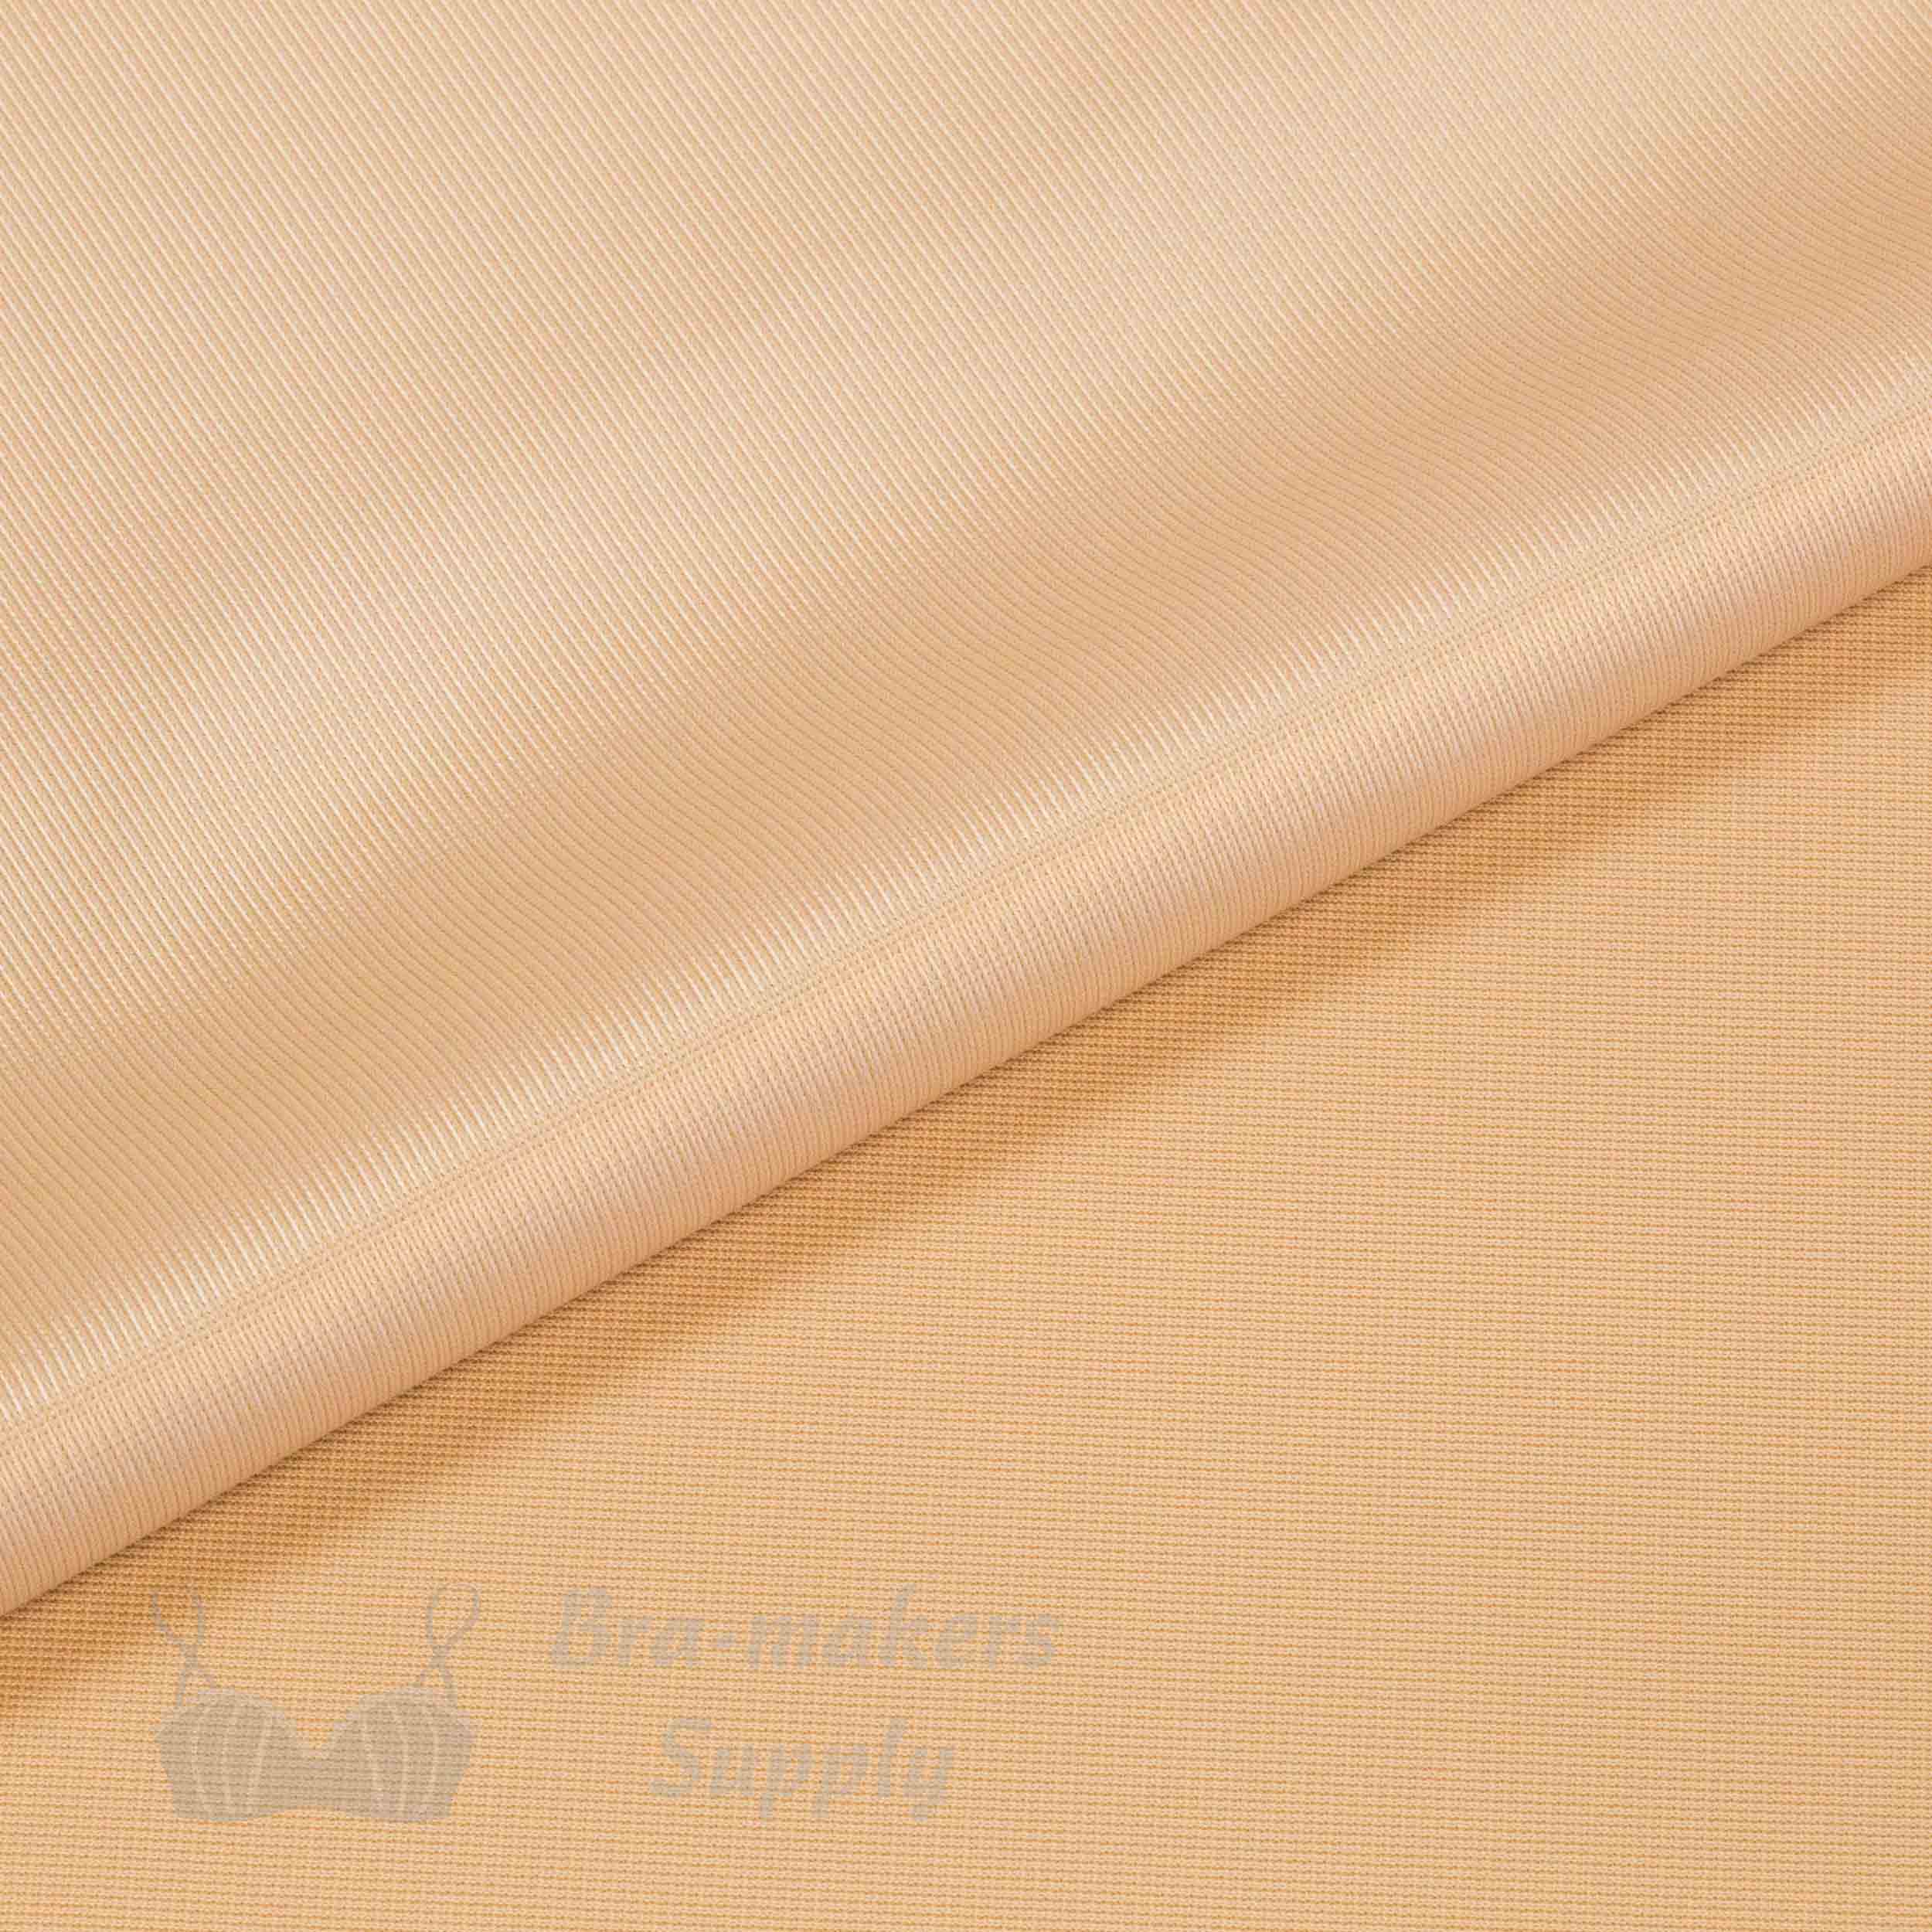 duoplex reversible low stretch bra cup fabric FJ-6 beige low stretch bra cup fabric frappe Pantone 14-1212 from Bra-Makers Supply folded